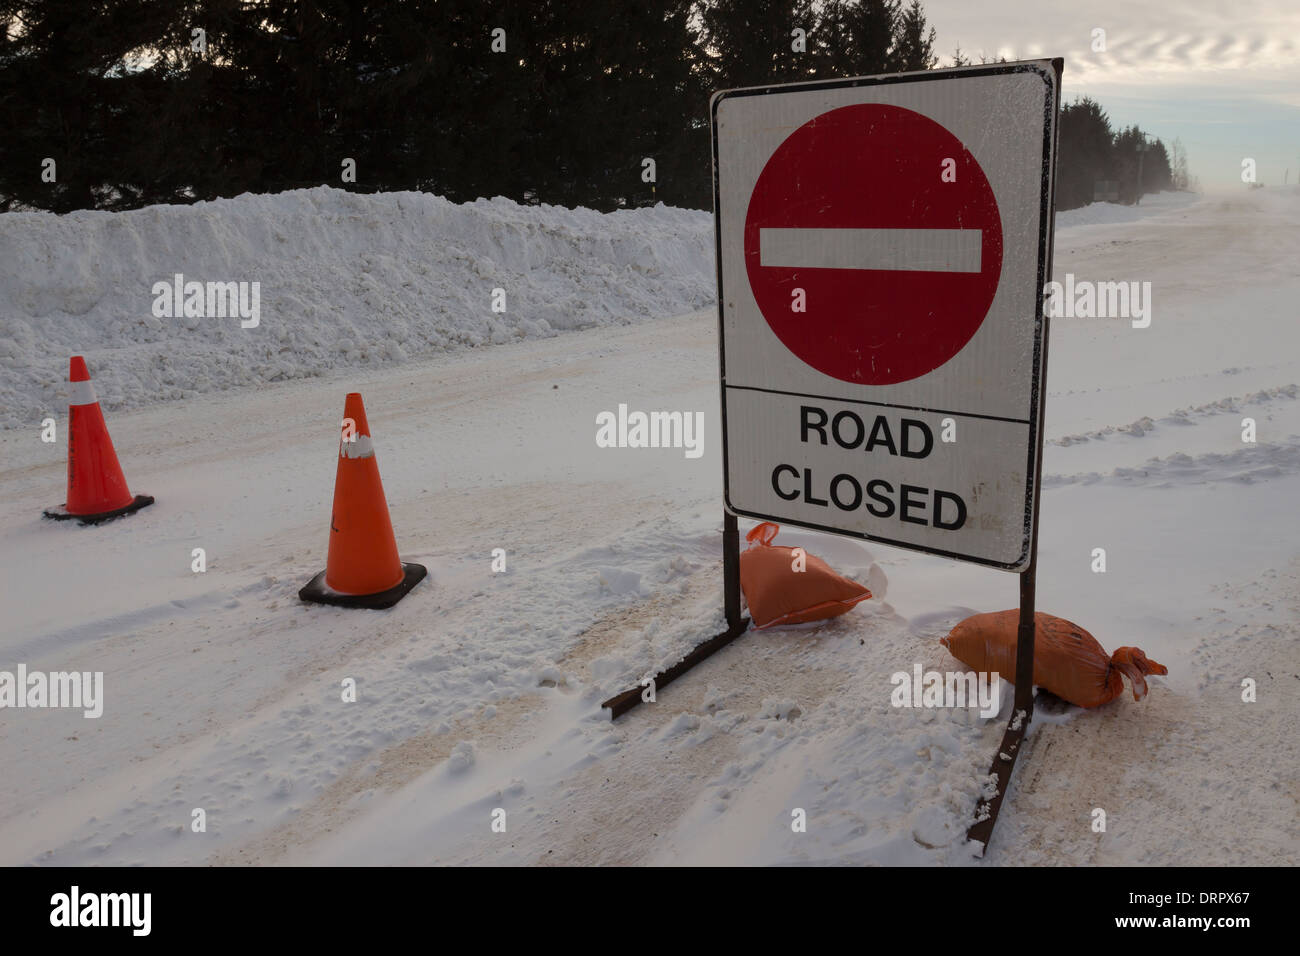 A road closure sign blocks a roadway after vehicles become trapped in wind blown winter snow & severe winter blizzard conditions Stock Photo